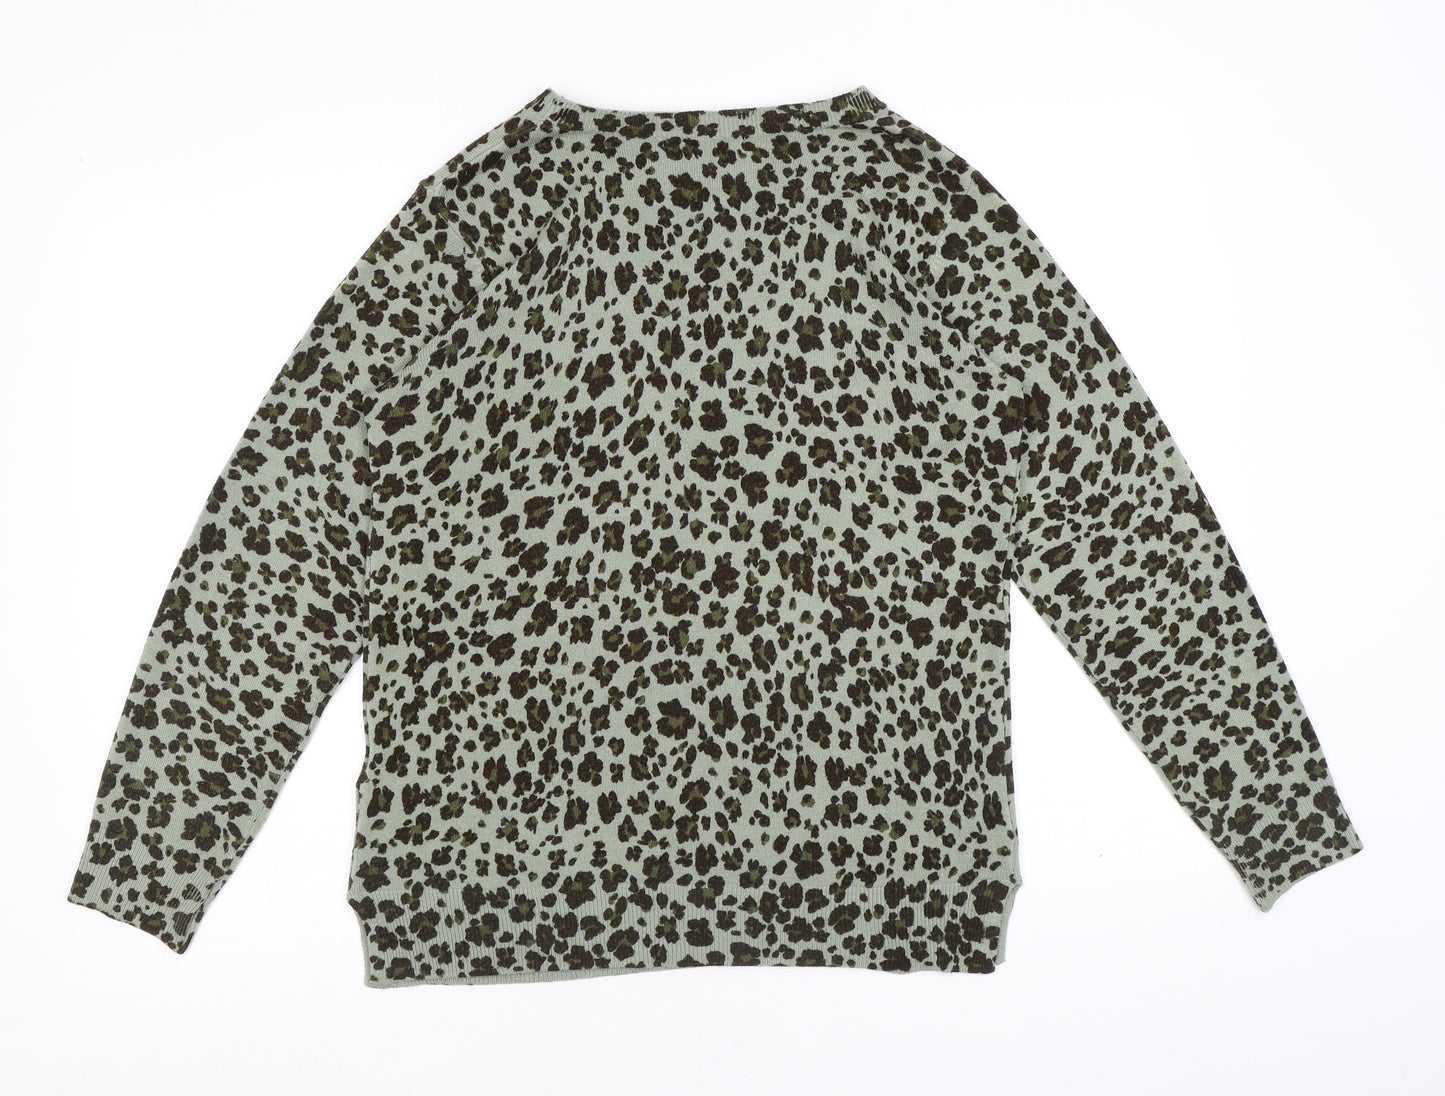 Marks and Spencer Womens Green Round Neck Animal Print Acrylic Pullover Jumper Size 12 - Leopard pattern